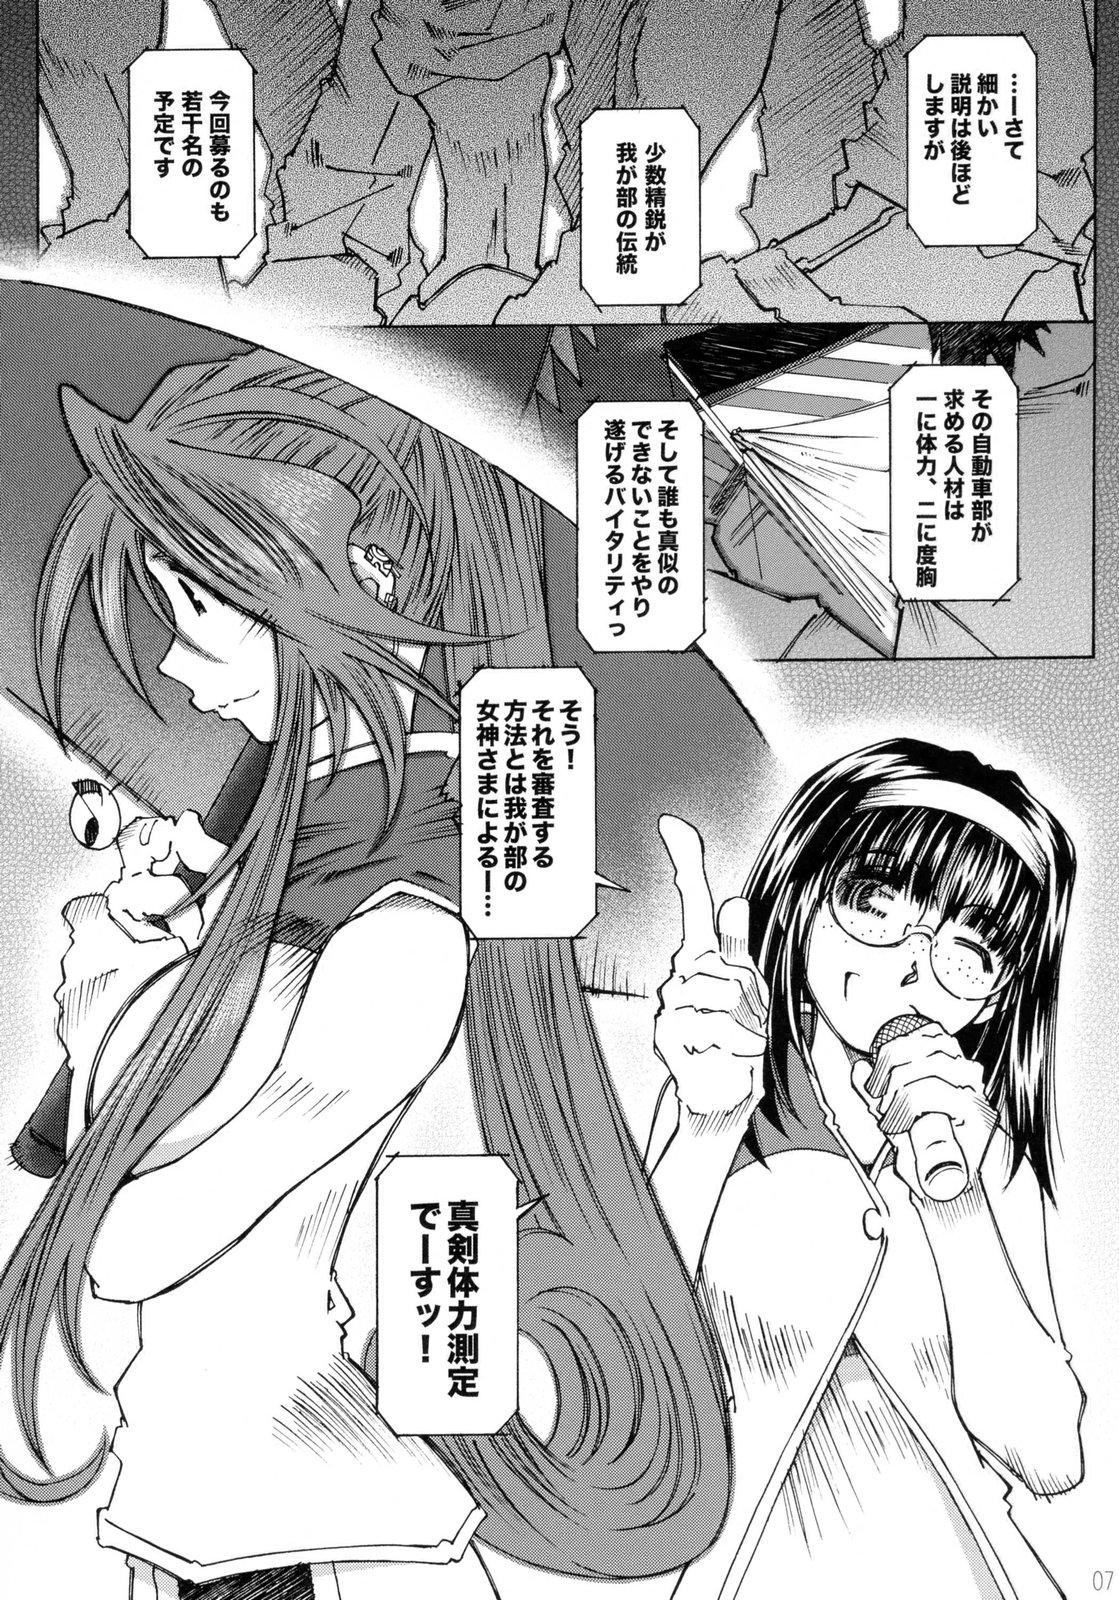 Analplay SILENT BELL outbreak - Ah my goddess Thuylinh - Page 7